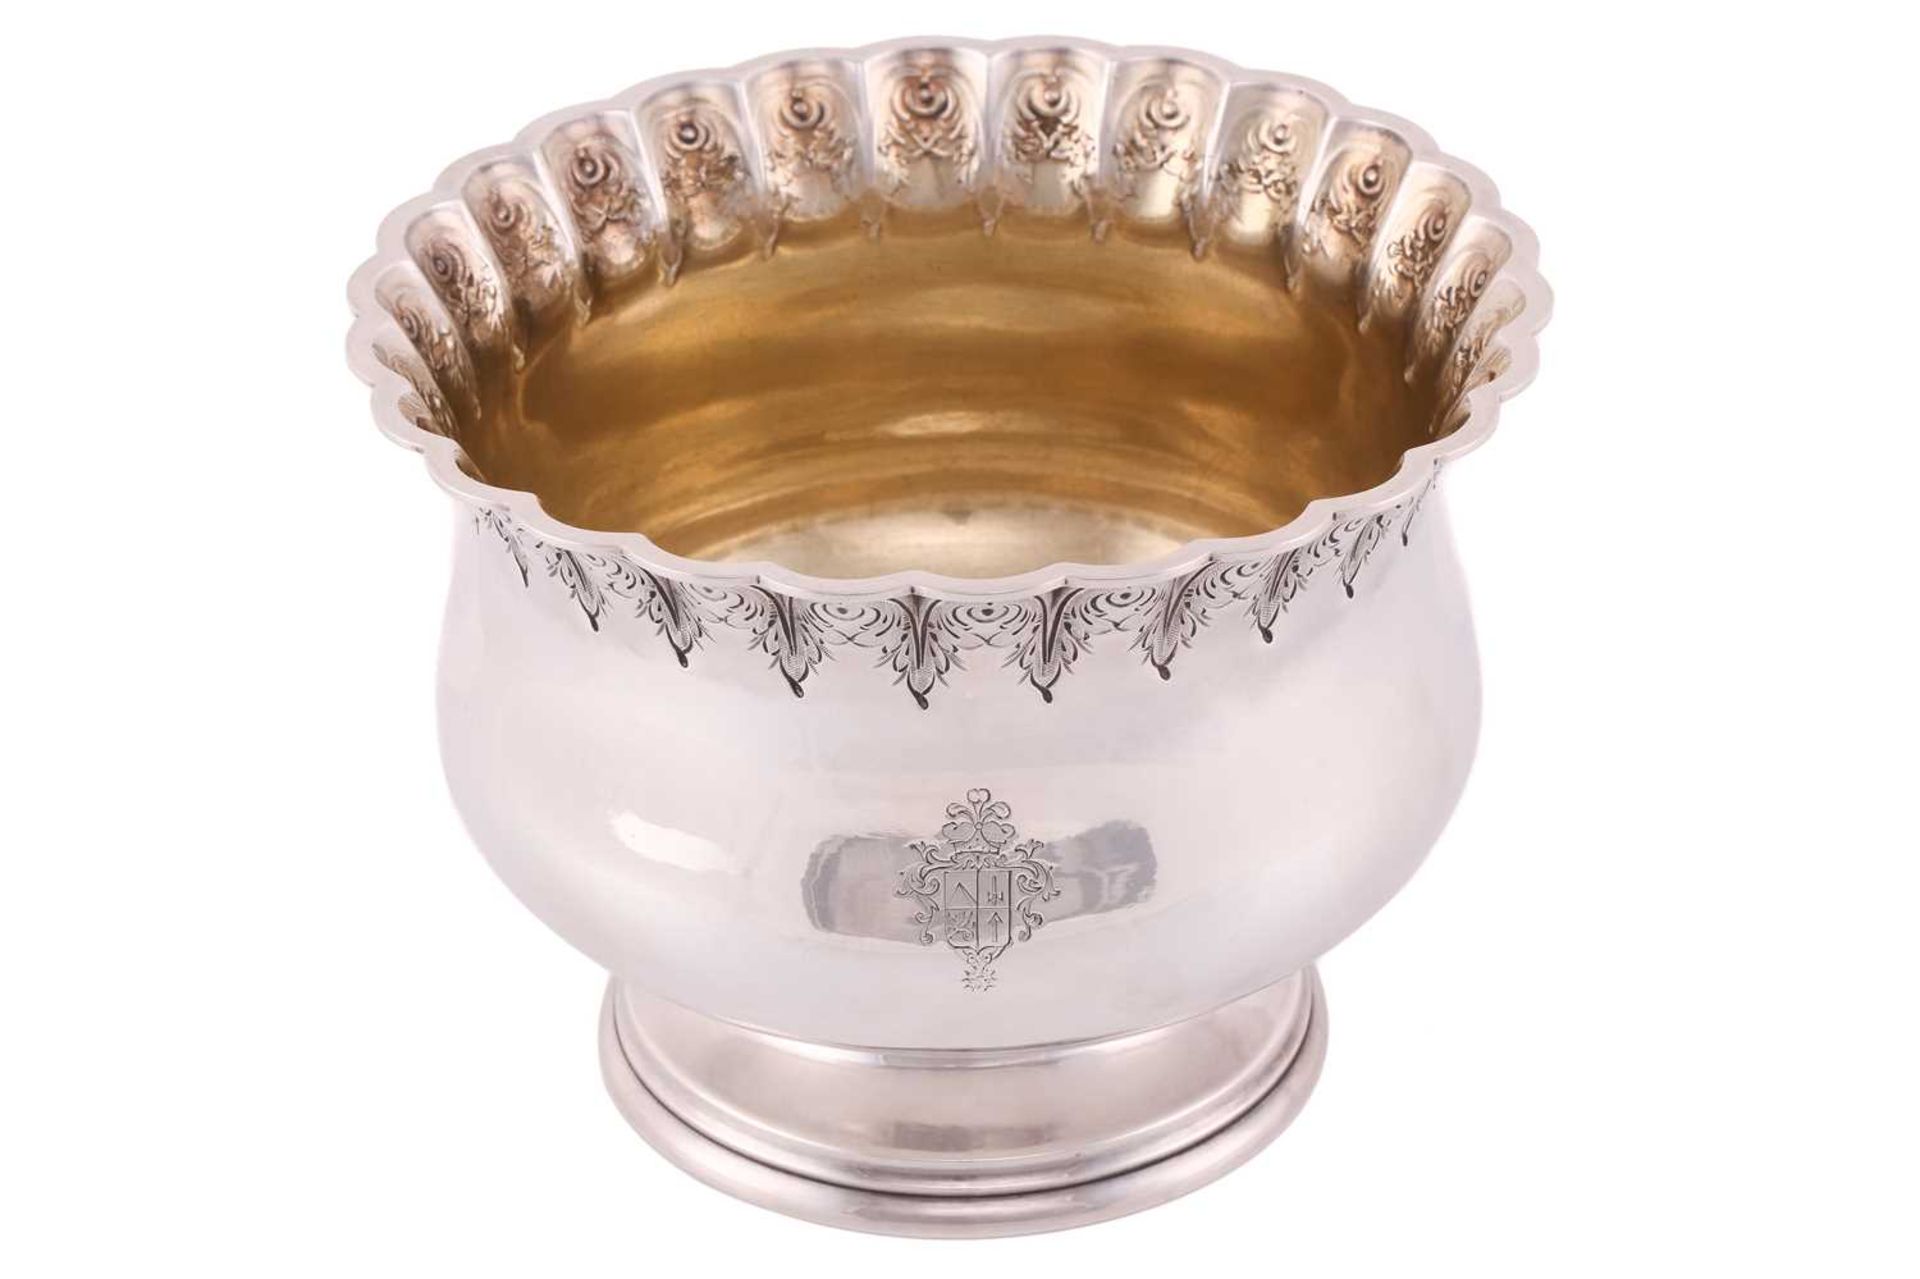 Grosjean & Woodward for Tiffany & Co; a 19th-century circular silver rose bowl, of heavy inverted